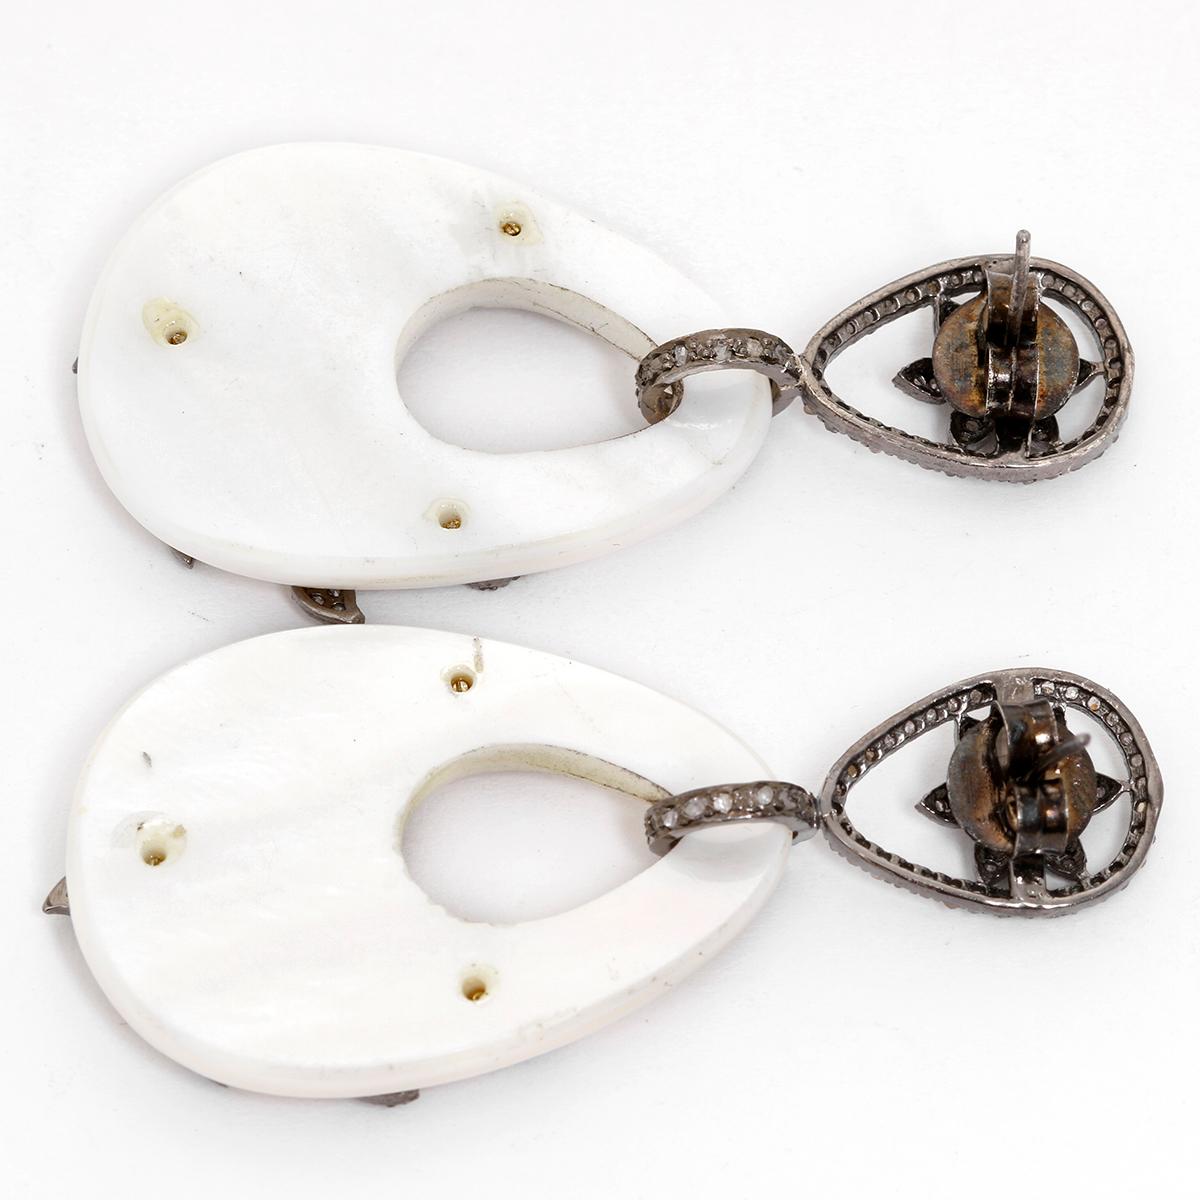 Pave Diamond and Mother of Pearl Dangling Earrings - . Oval shaped Mother of Pearl earrings. Set in 9 grams of Sterling Silver with decorative flower diamonds. Total diamond weight 2.6 cts. Total weight 19.8 grams.